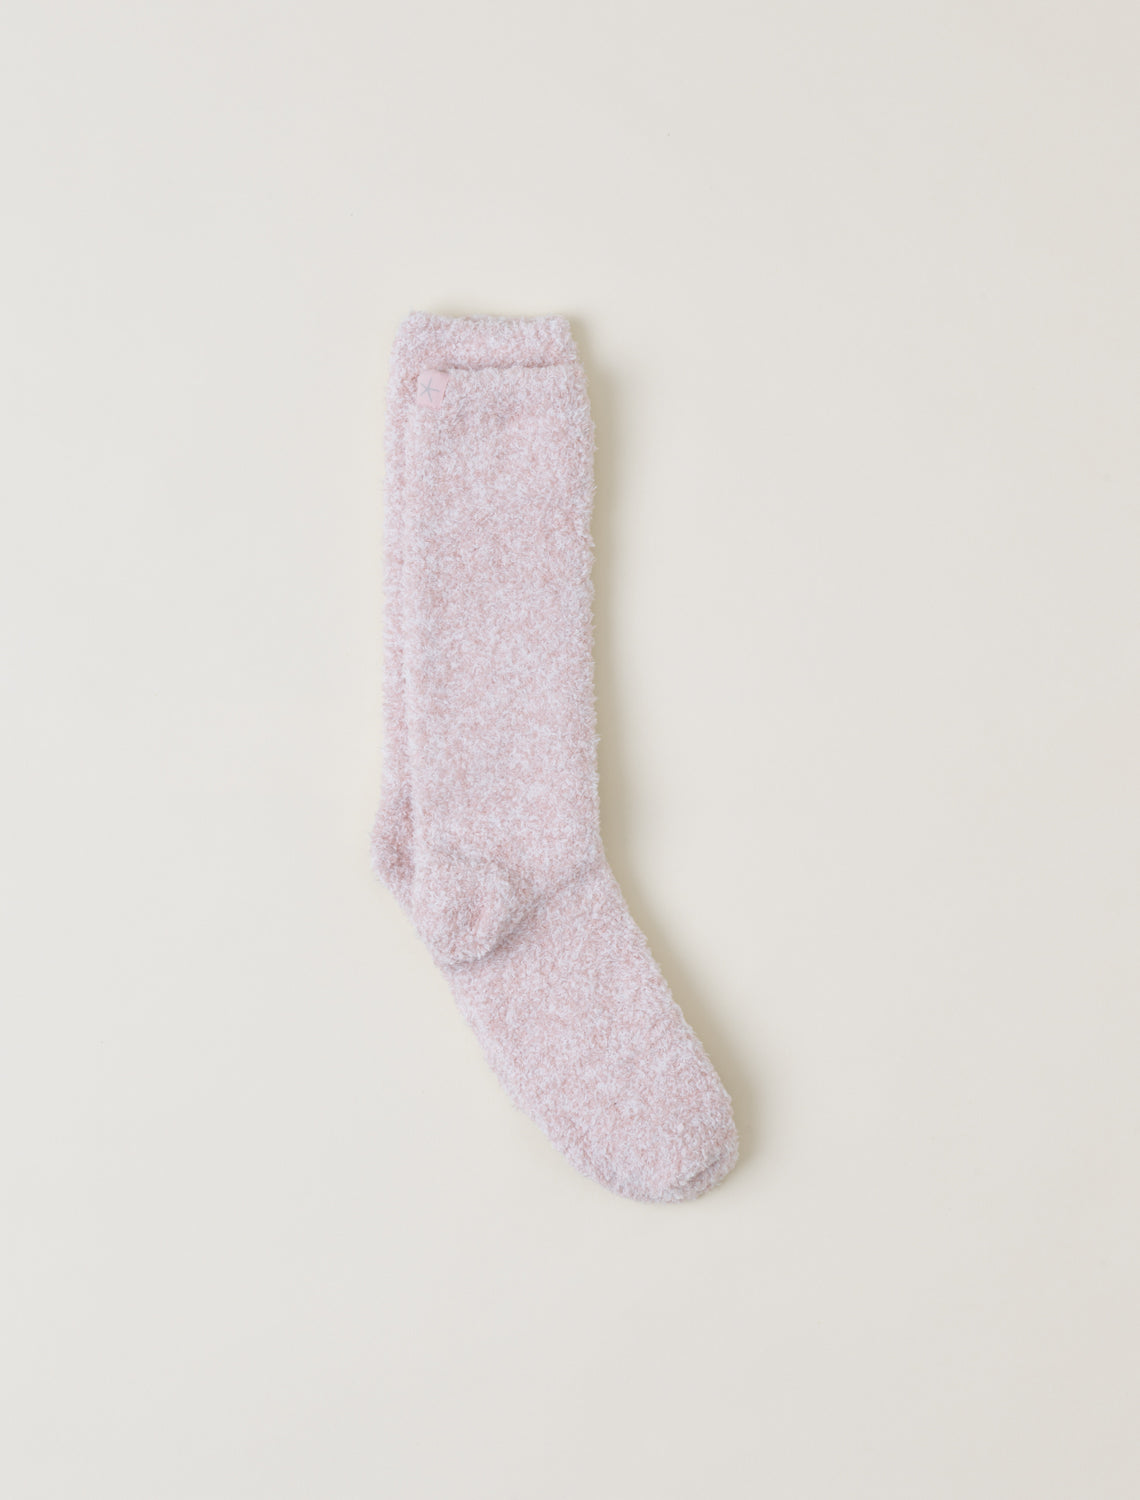 leela & lavender - The perfect go-to gift🤍 Barefoot Dreams socks